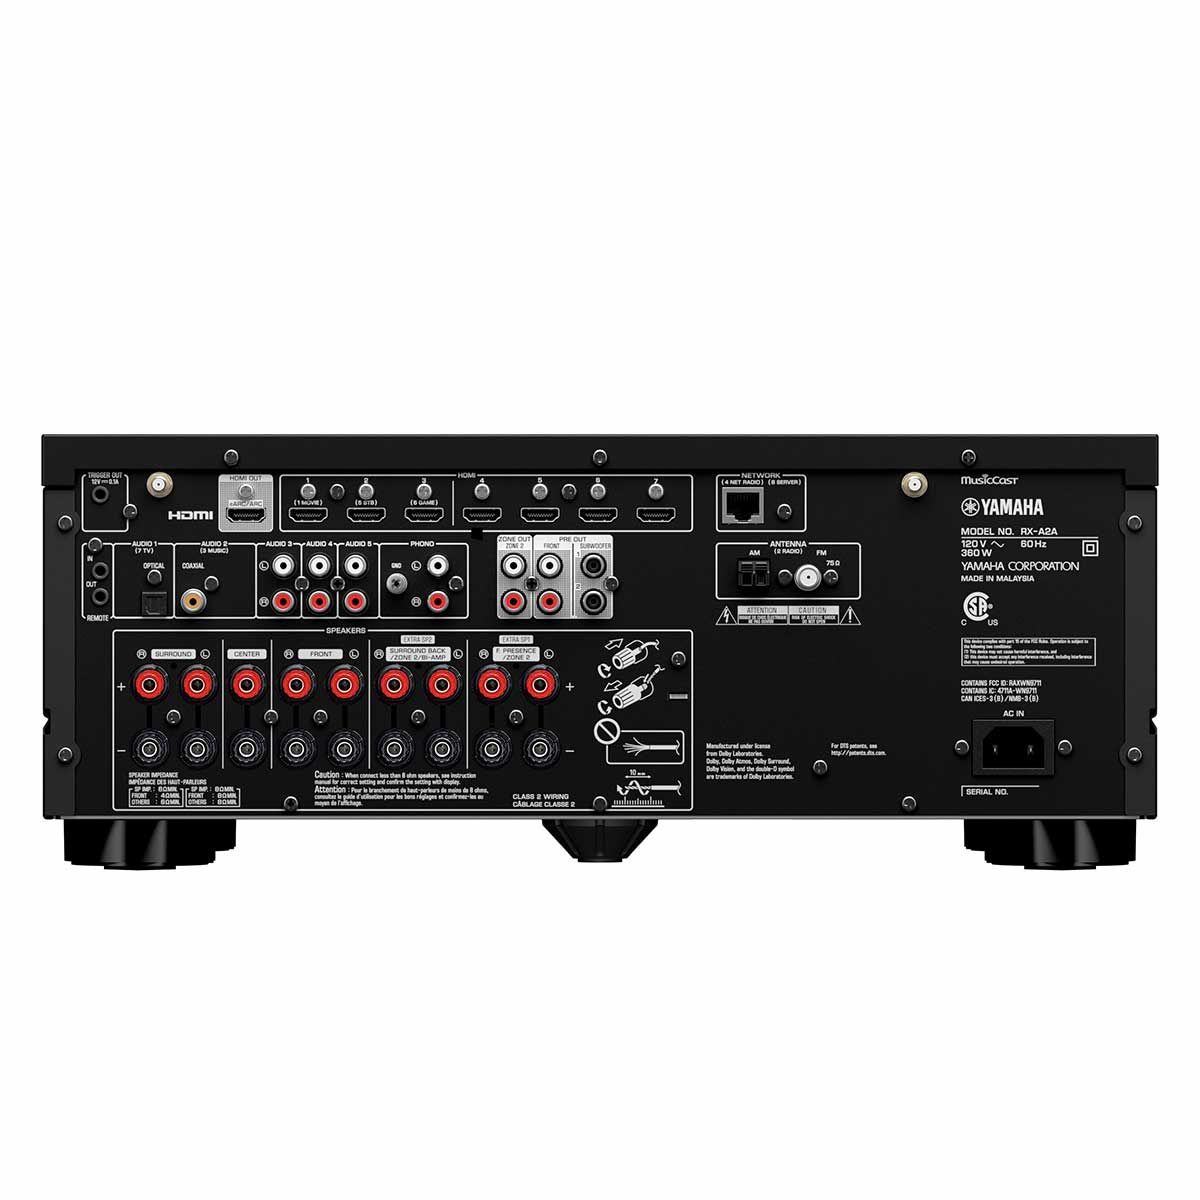 Yamaha Aventage RX-A2A A/V Home Theater Receiver, Black, back panel view